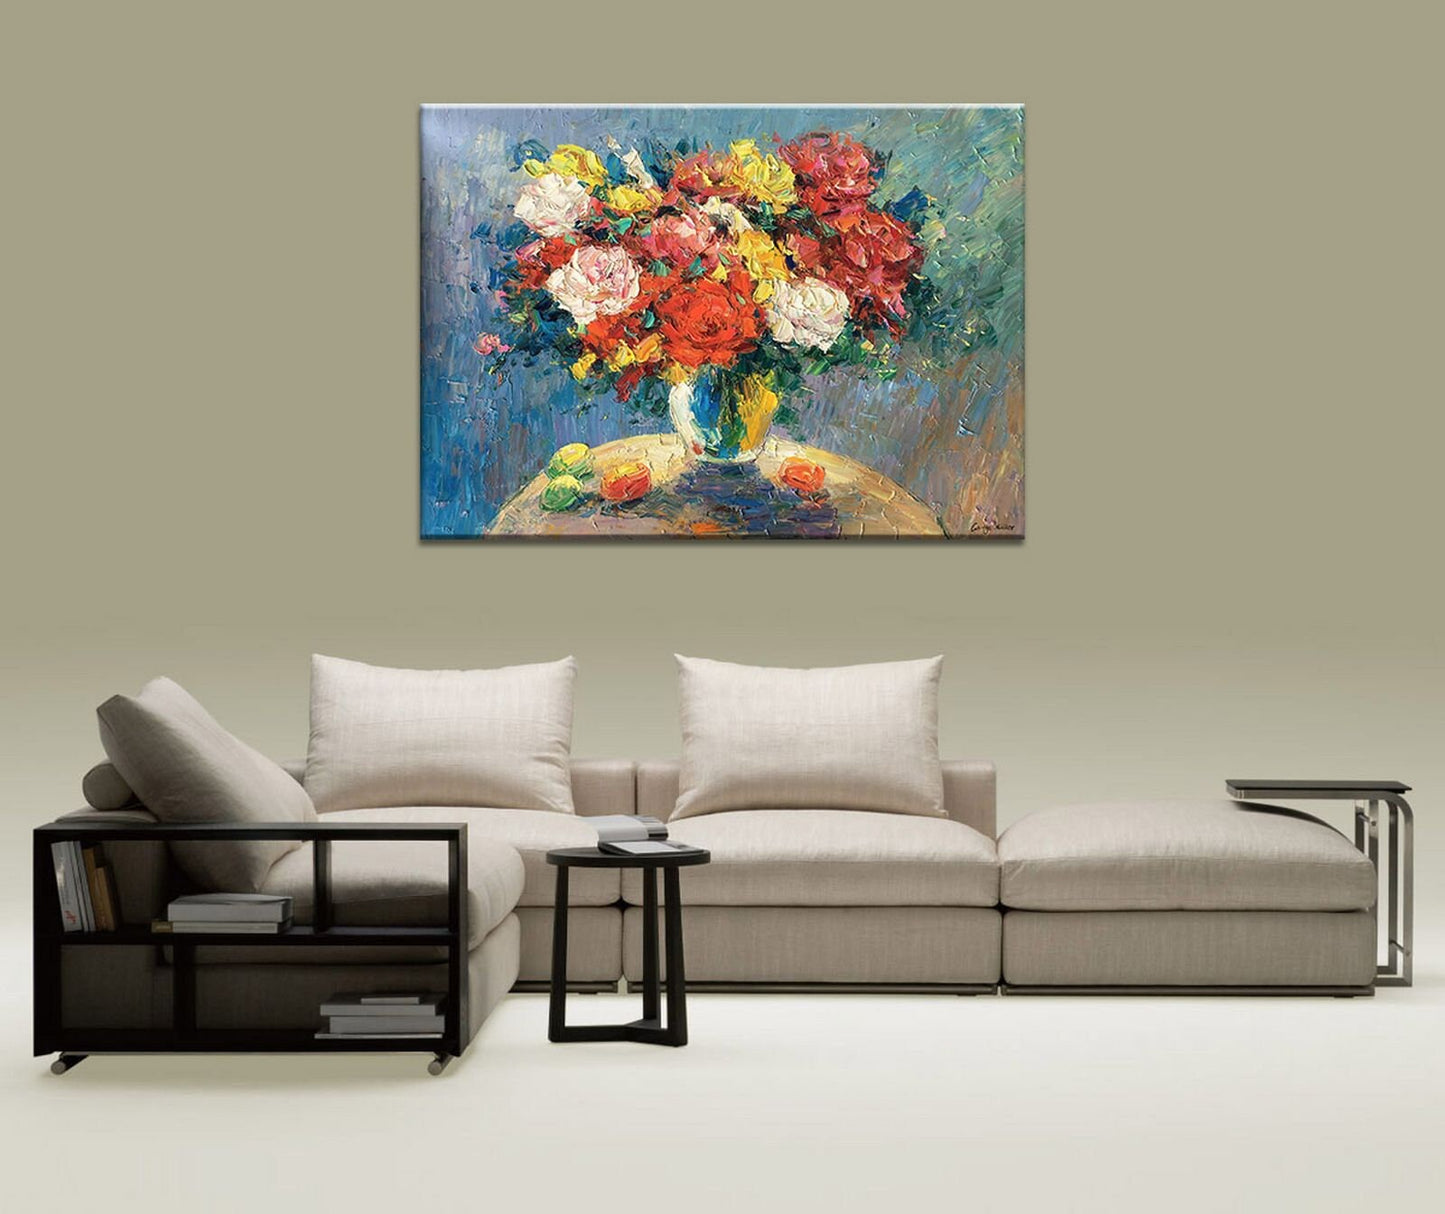 Abstract Spring Flowers - Large Canvas Art - Contemporary Wall Decor - Textured - Ready to Hang